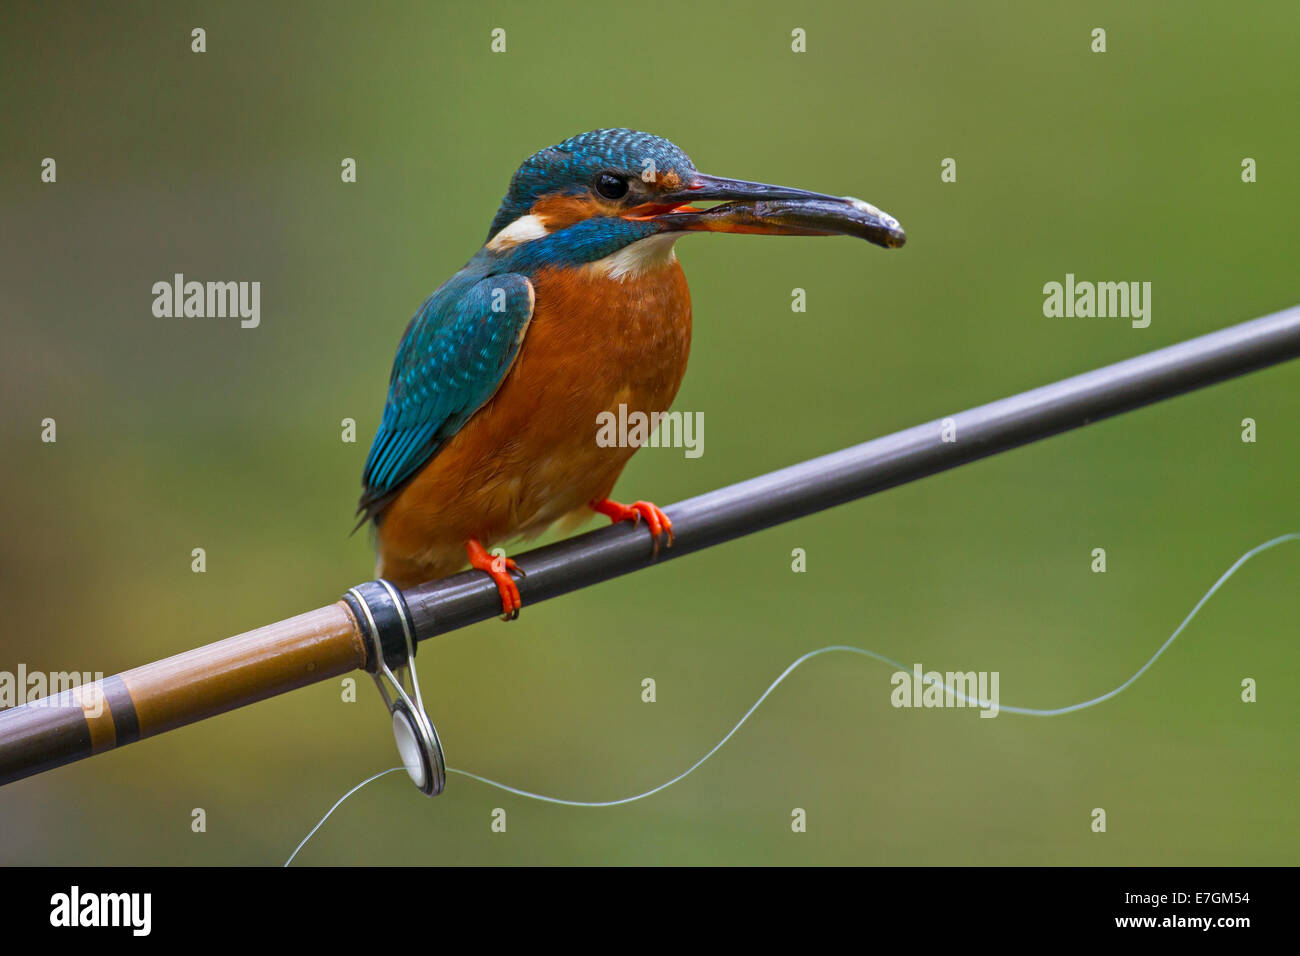 Common kingfisher / Eurasian kingfisher (Alcedo atthis) with caught fish in beak, perched on fishing rod from angler Stock Photo